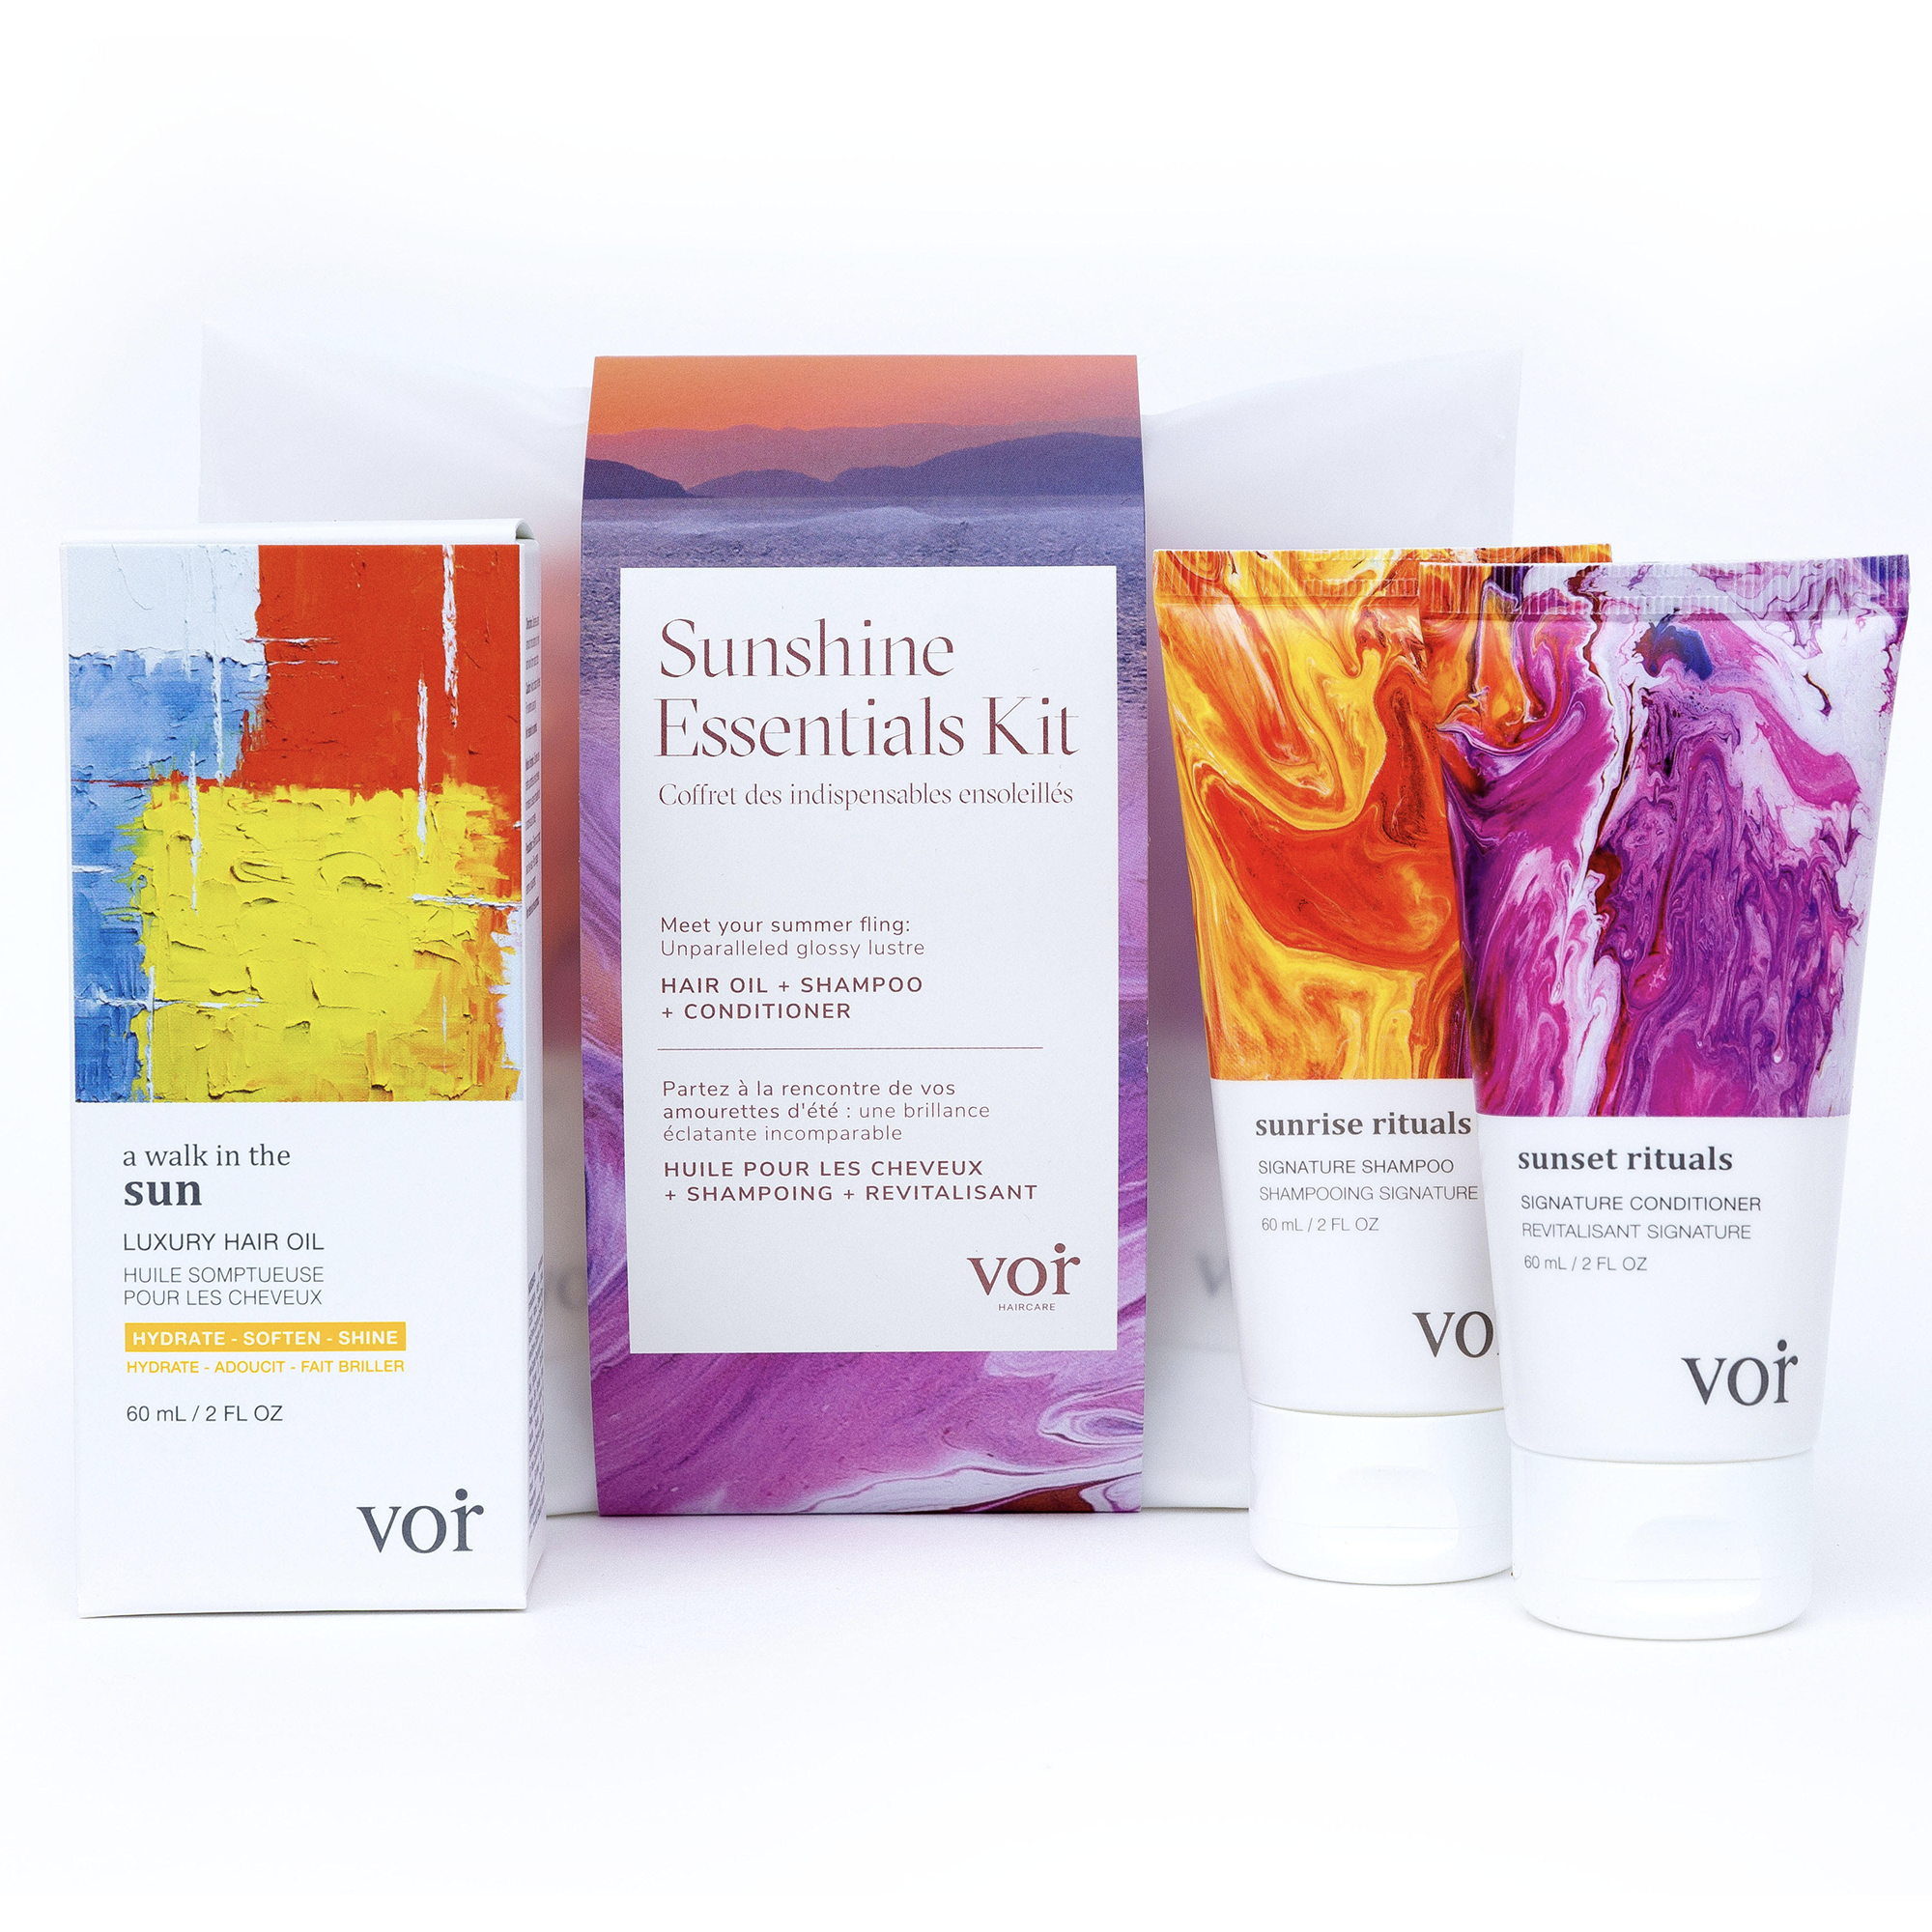 Sunshine Essentials Kit by VOIR Haircare available online in Canada at Socialite Beauty.